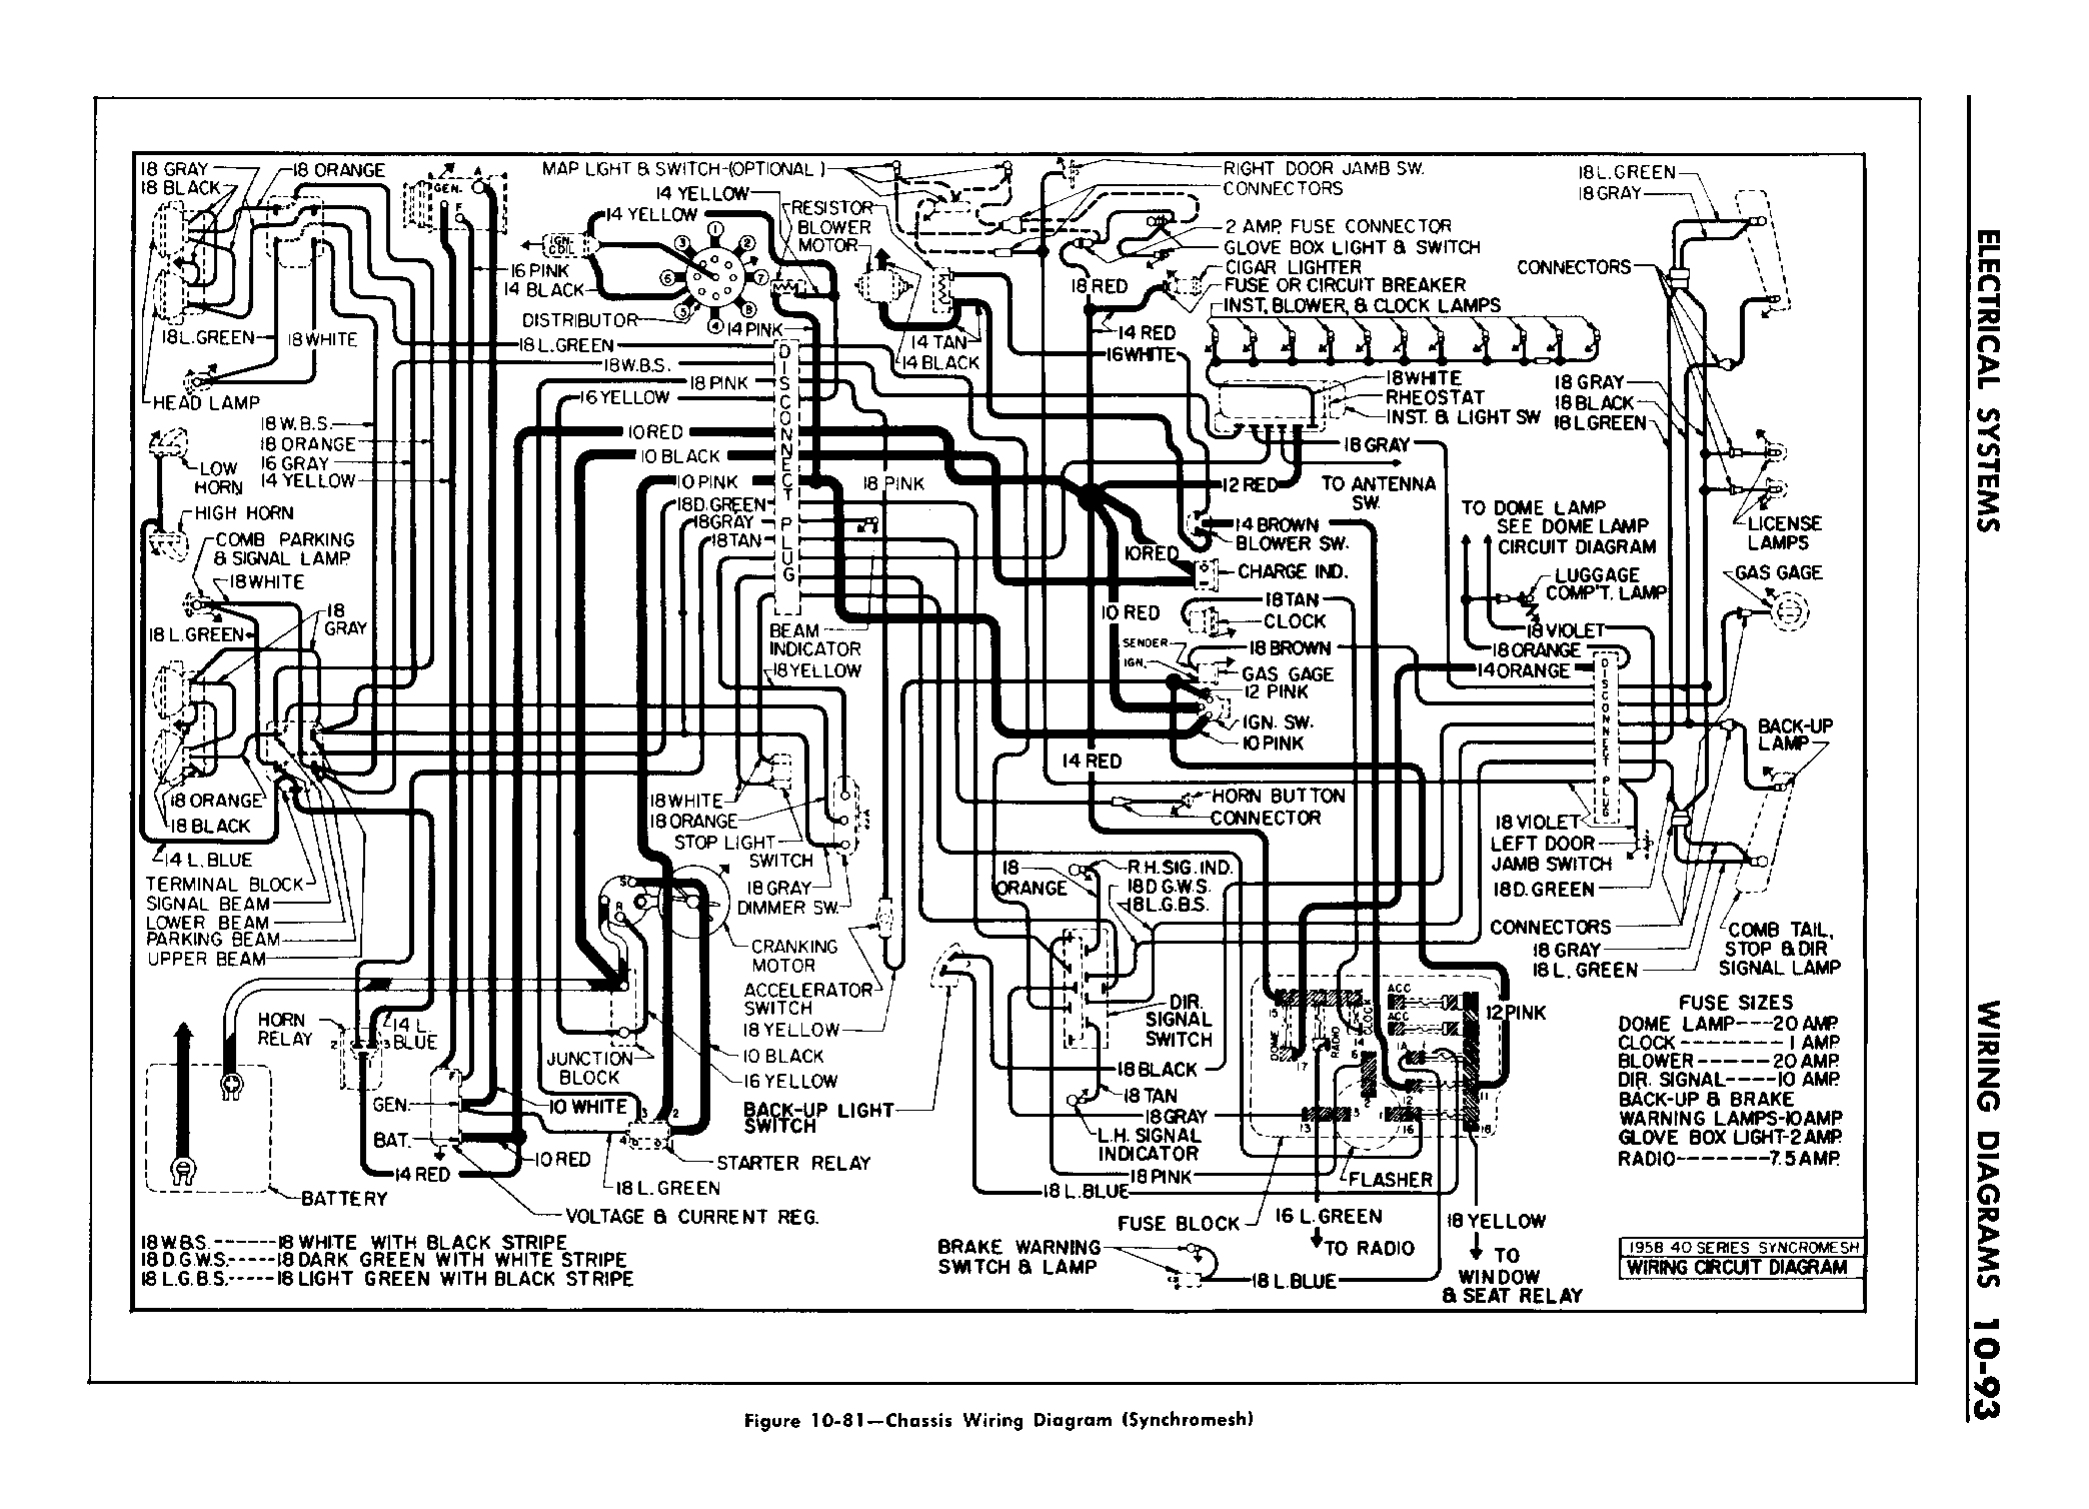 n_11 1958 Buick Shop Manual - Electrical Systems_93.jpg